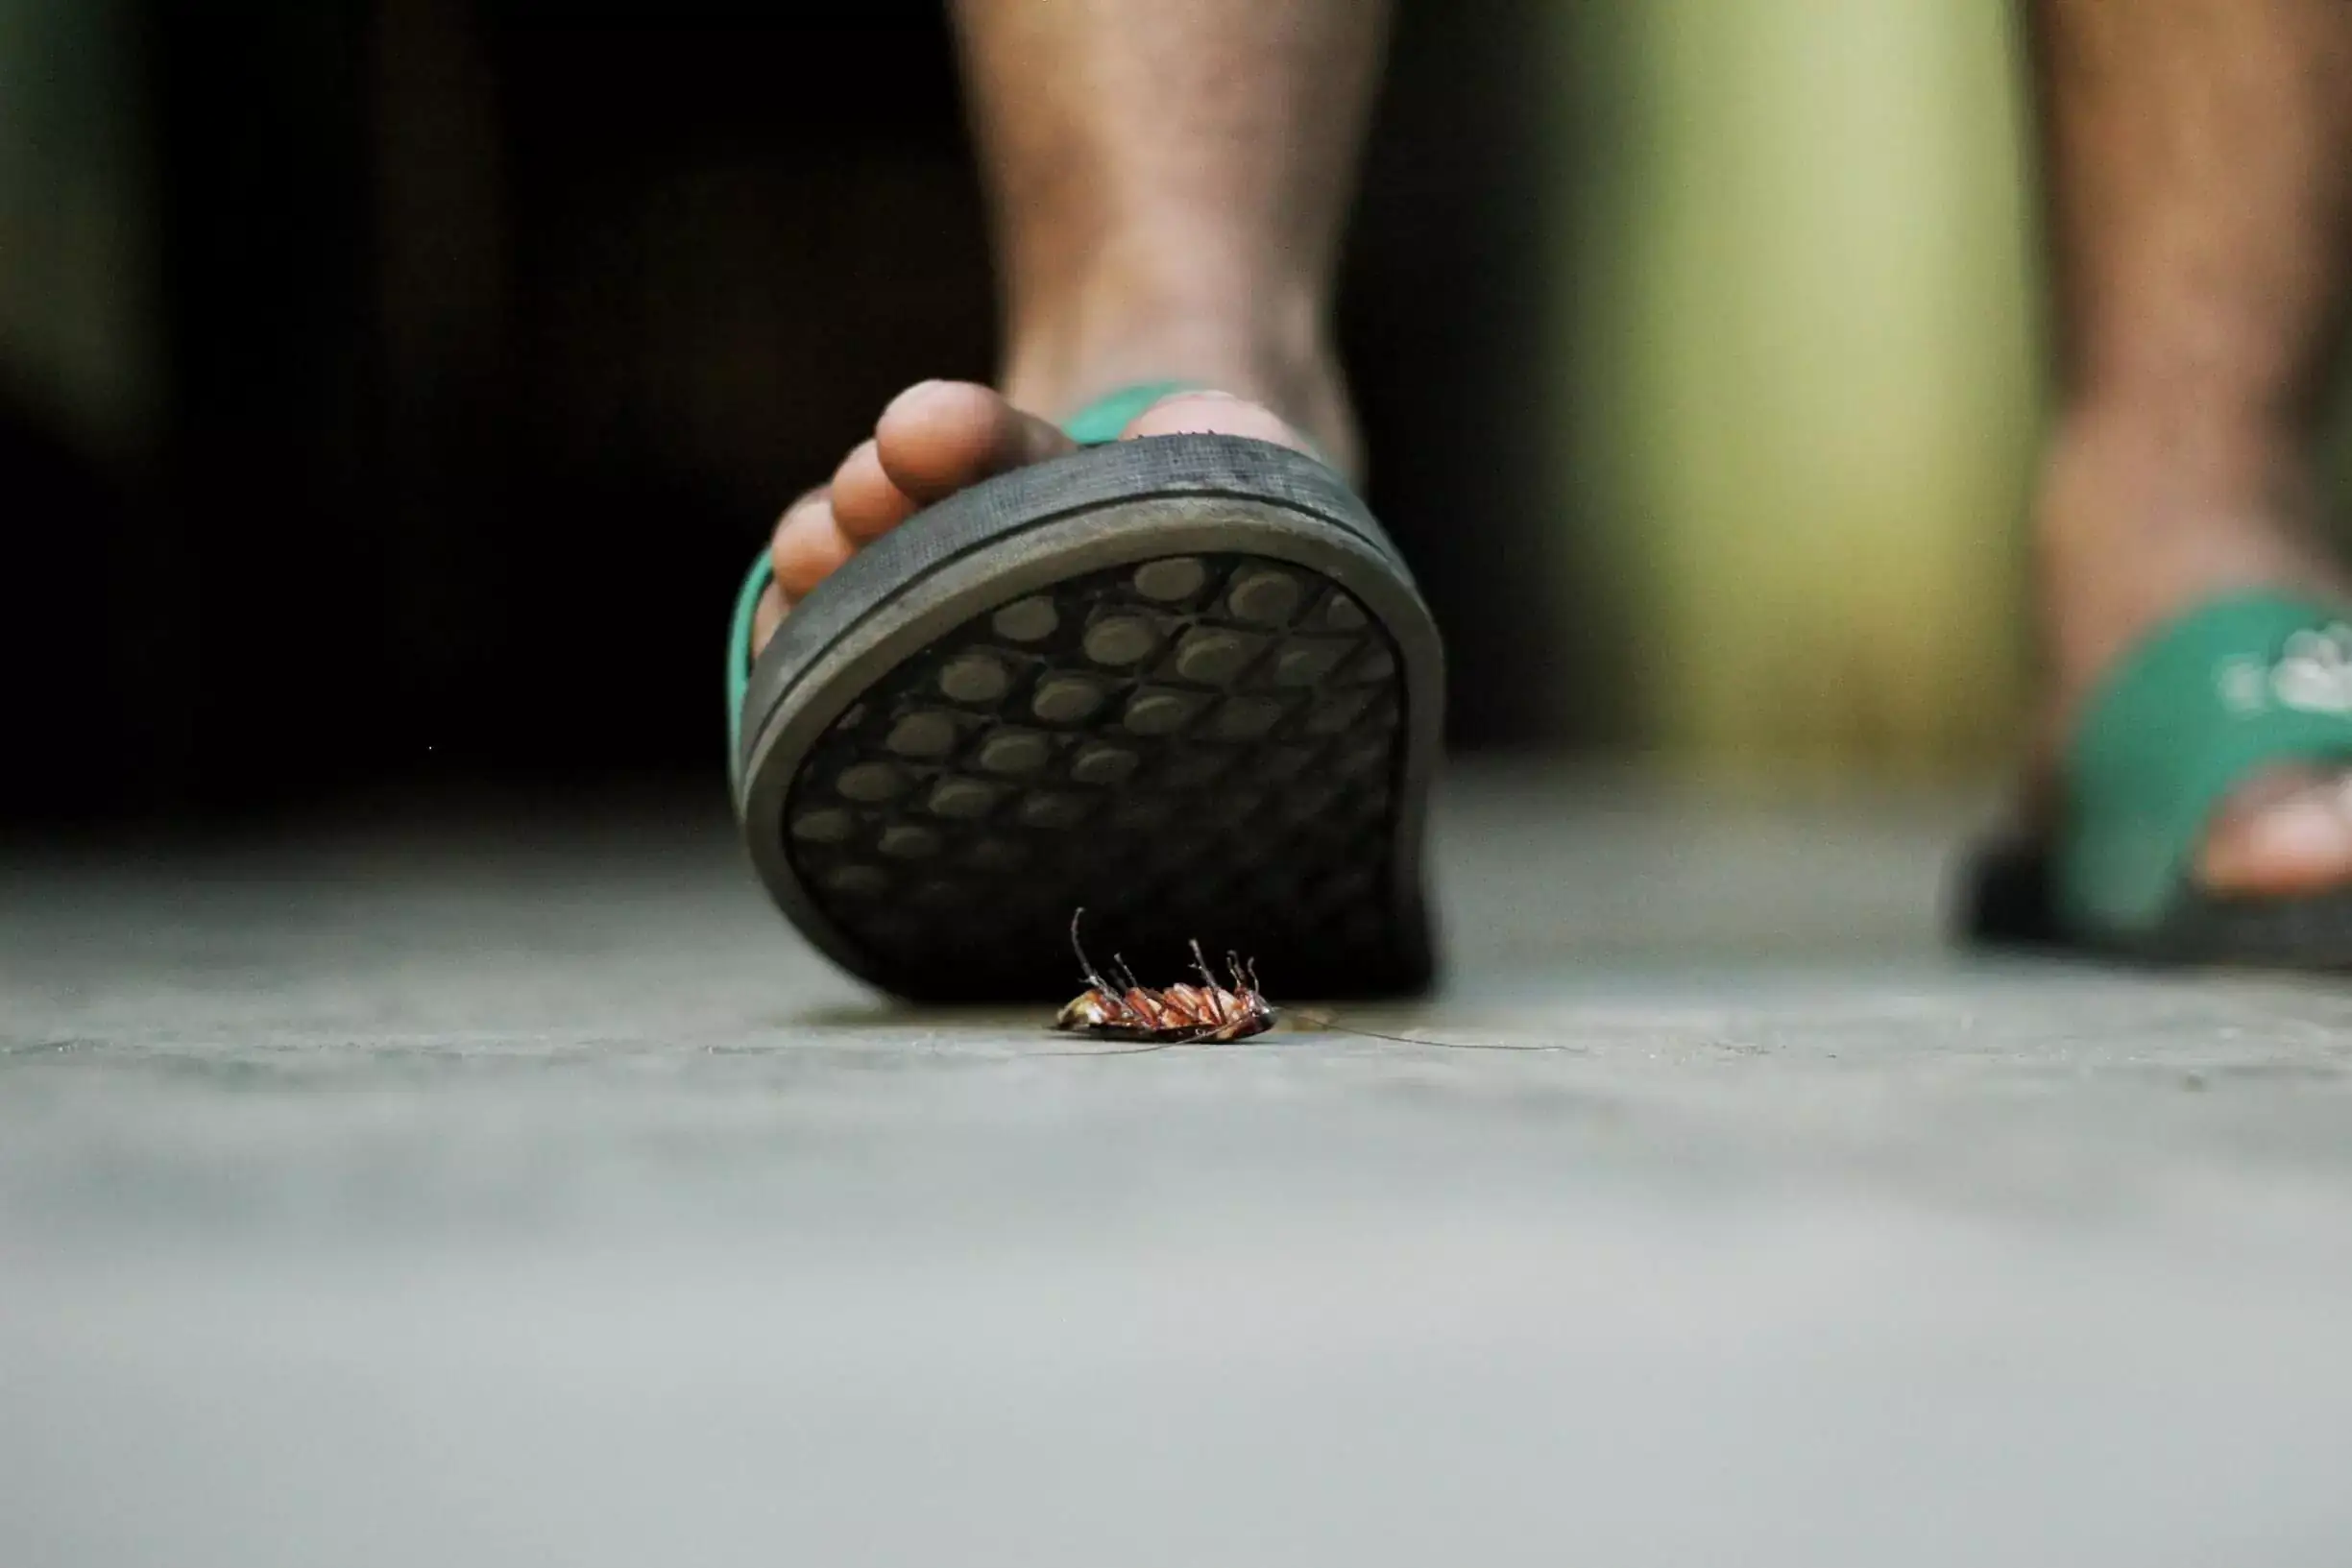 Person about to step on a cockroach.